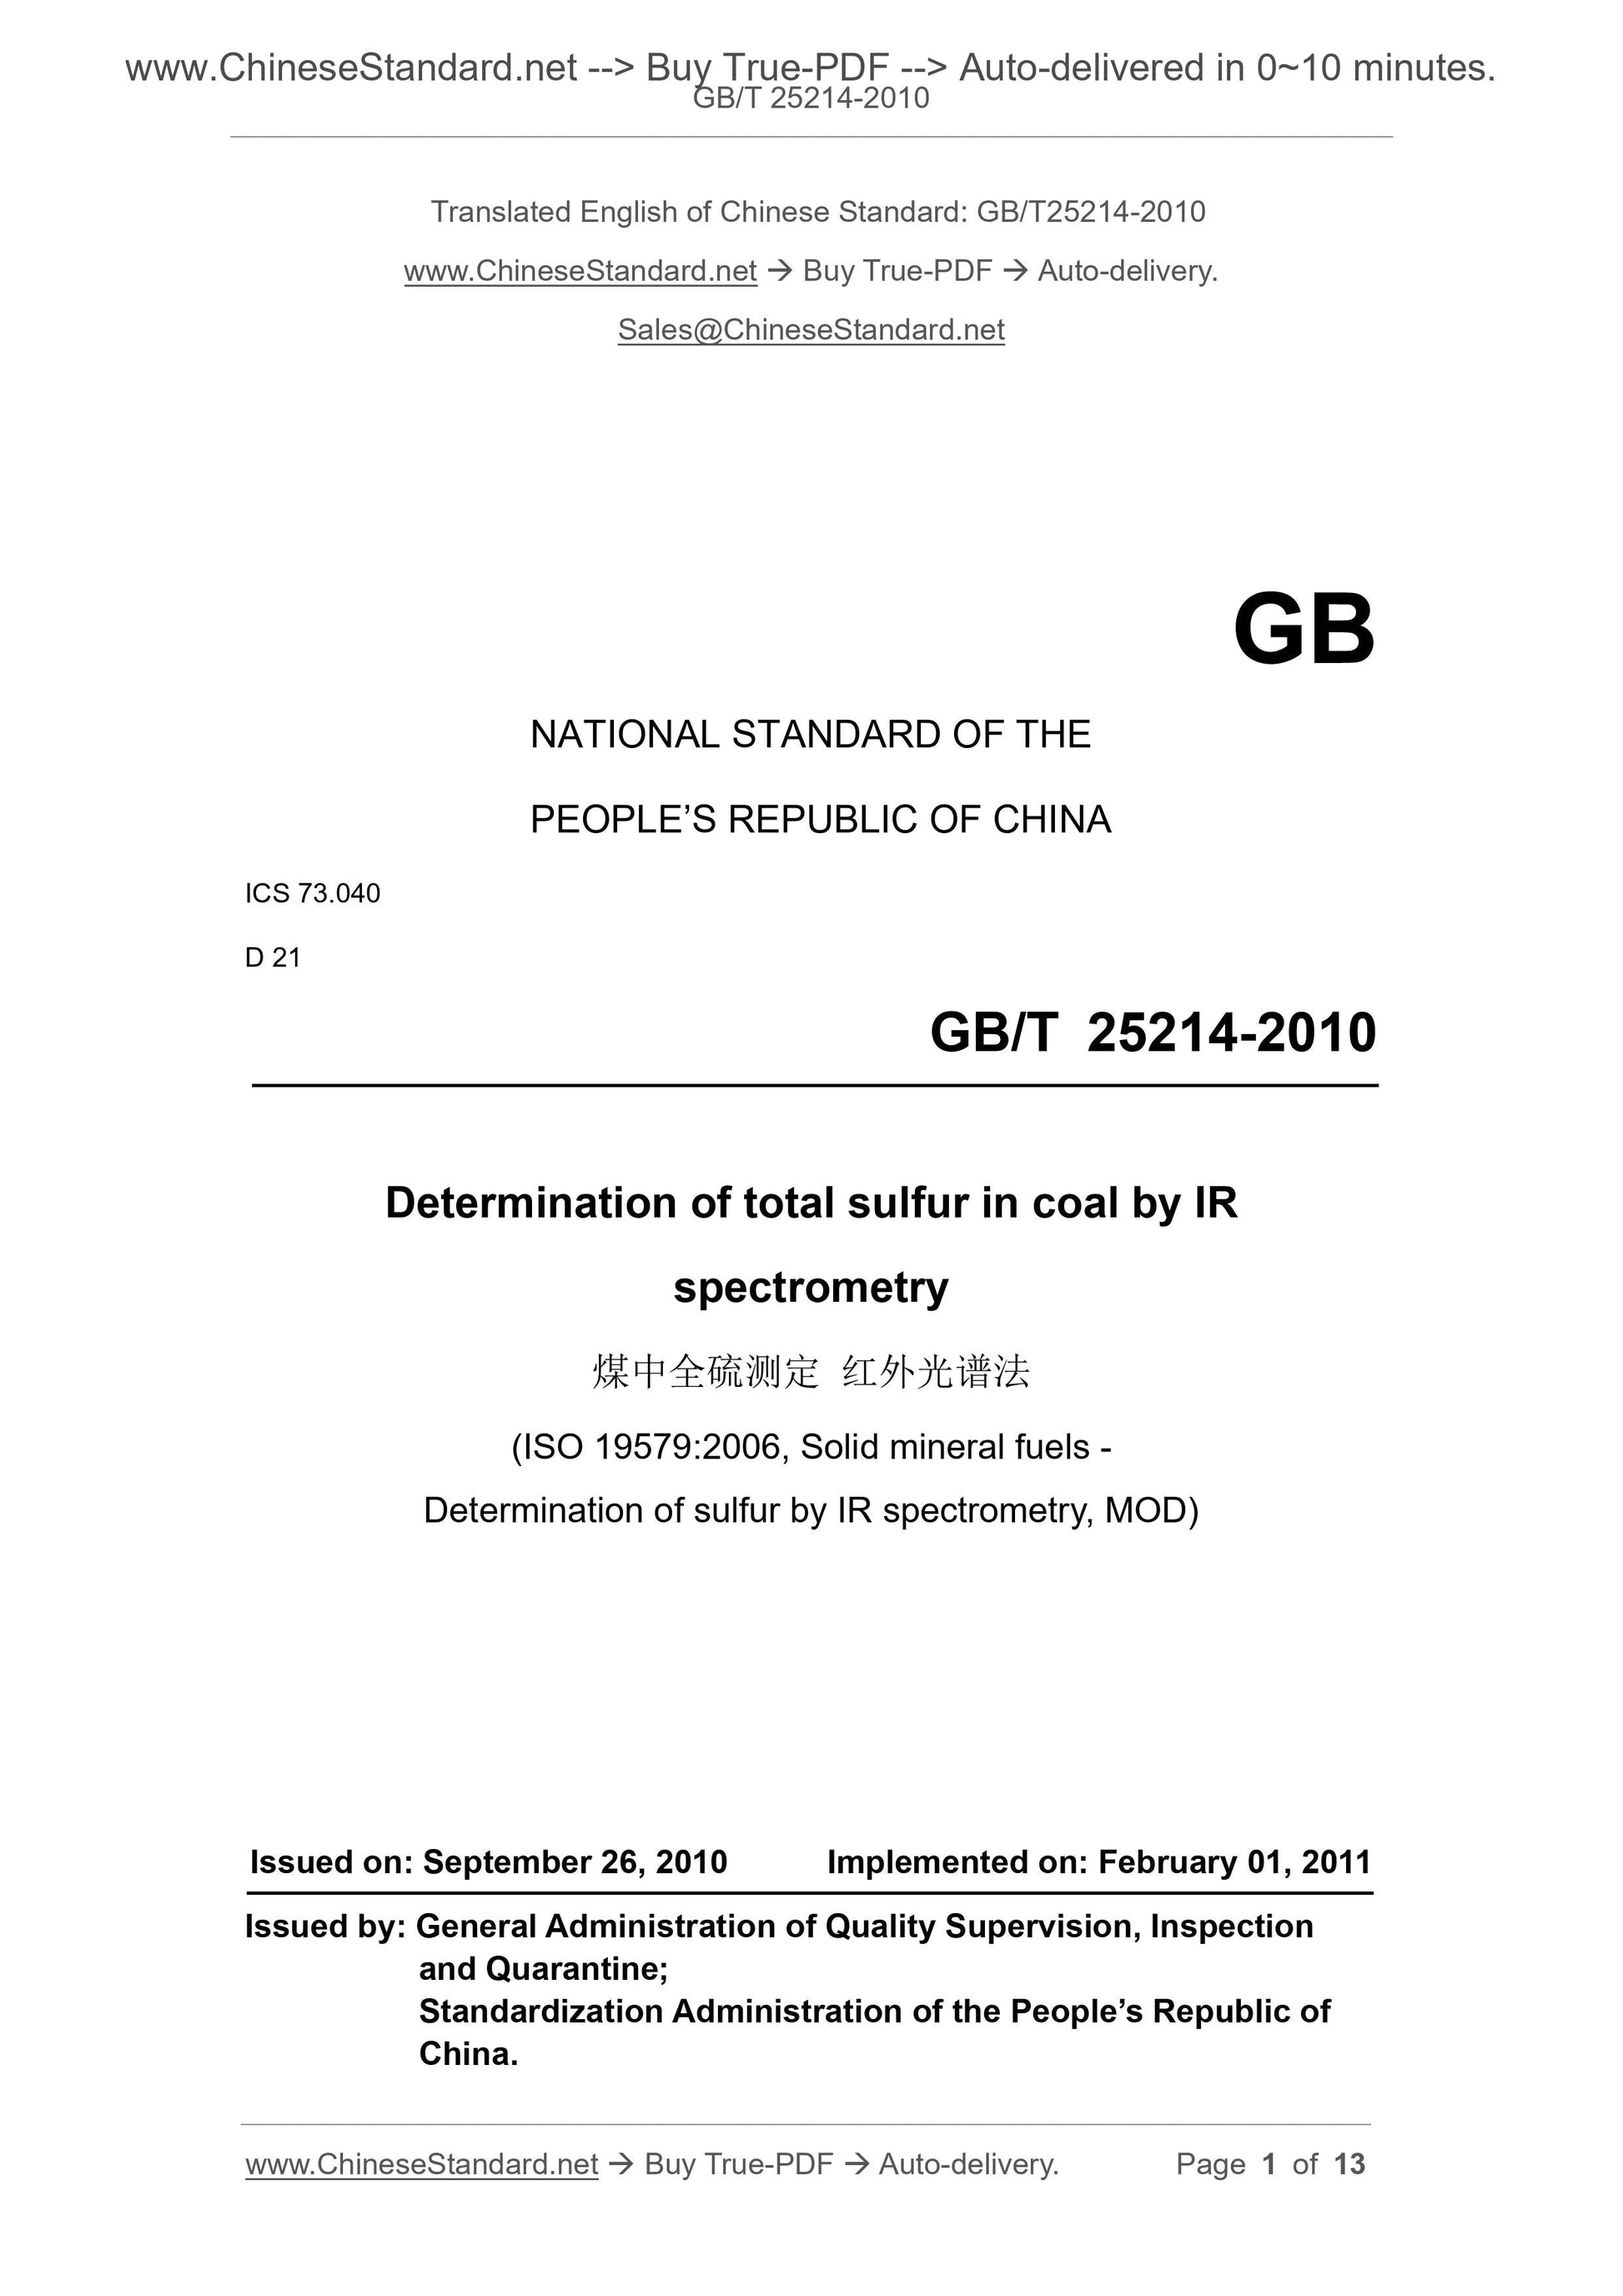 GB/T 25214-2010 Page 1